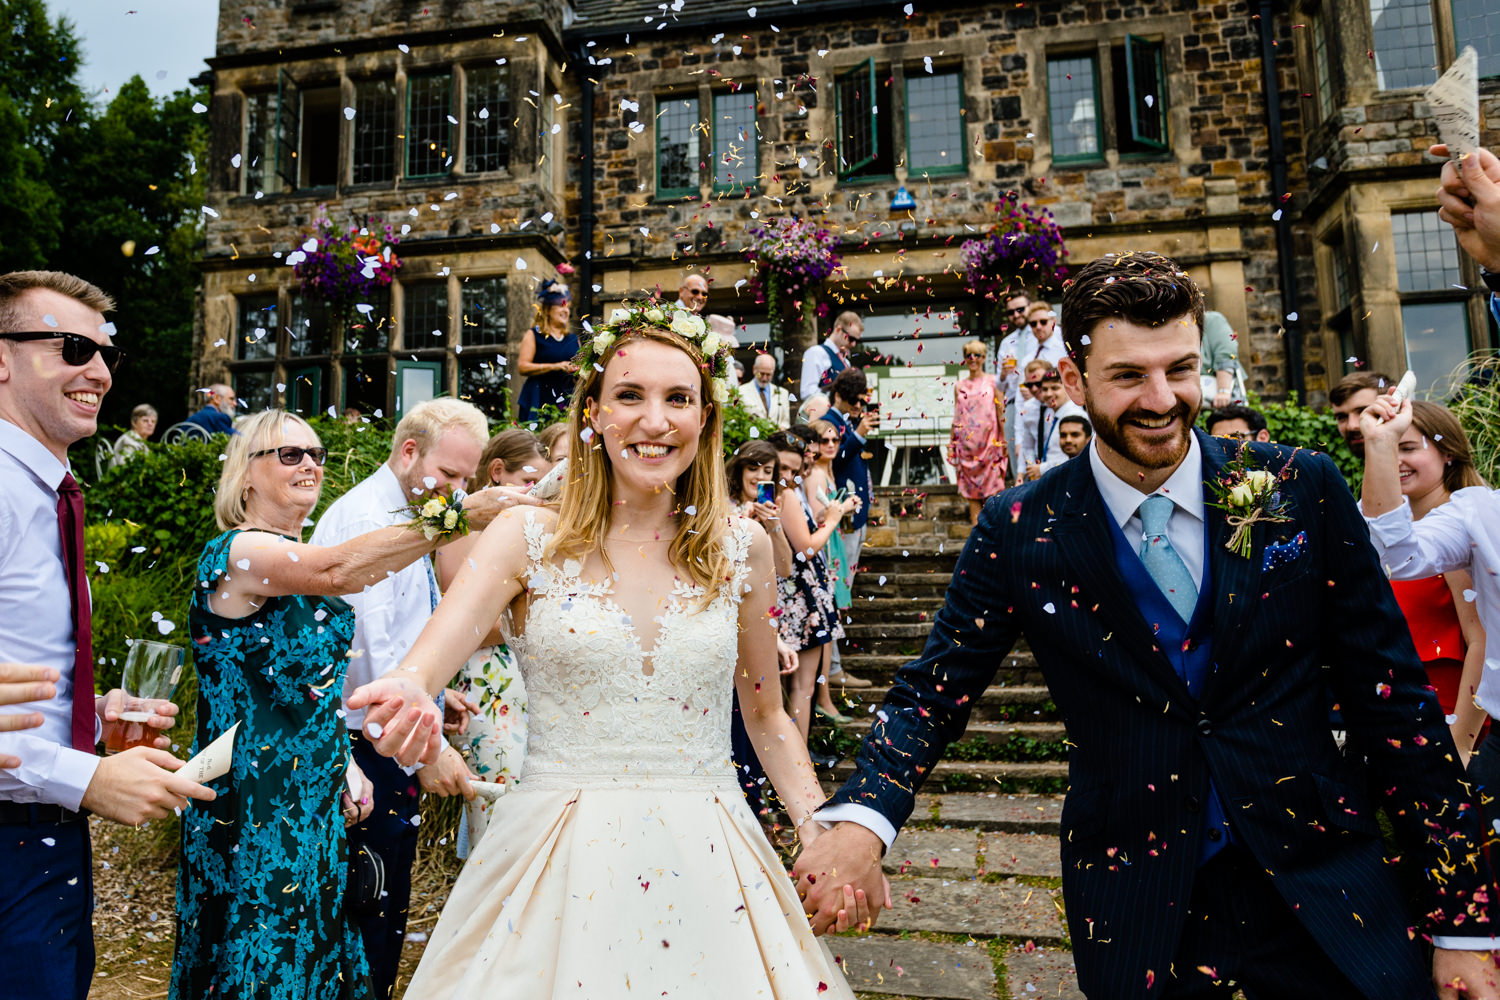 Confetti being thrown at a bride and groom, Whirlowbrook Hall wedding photo.